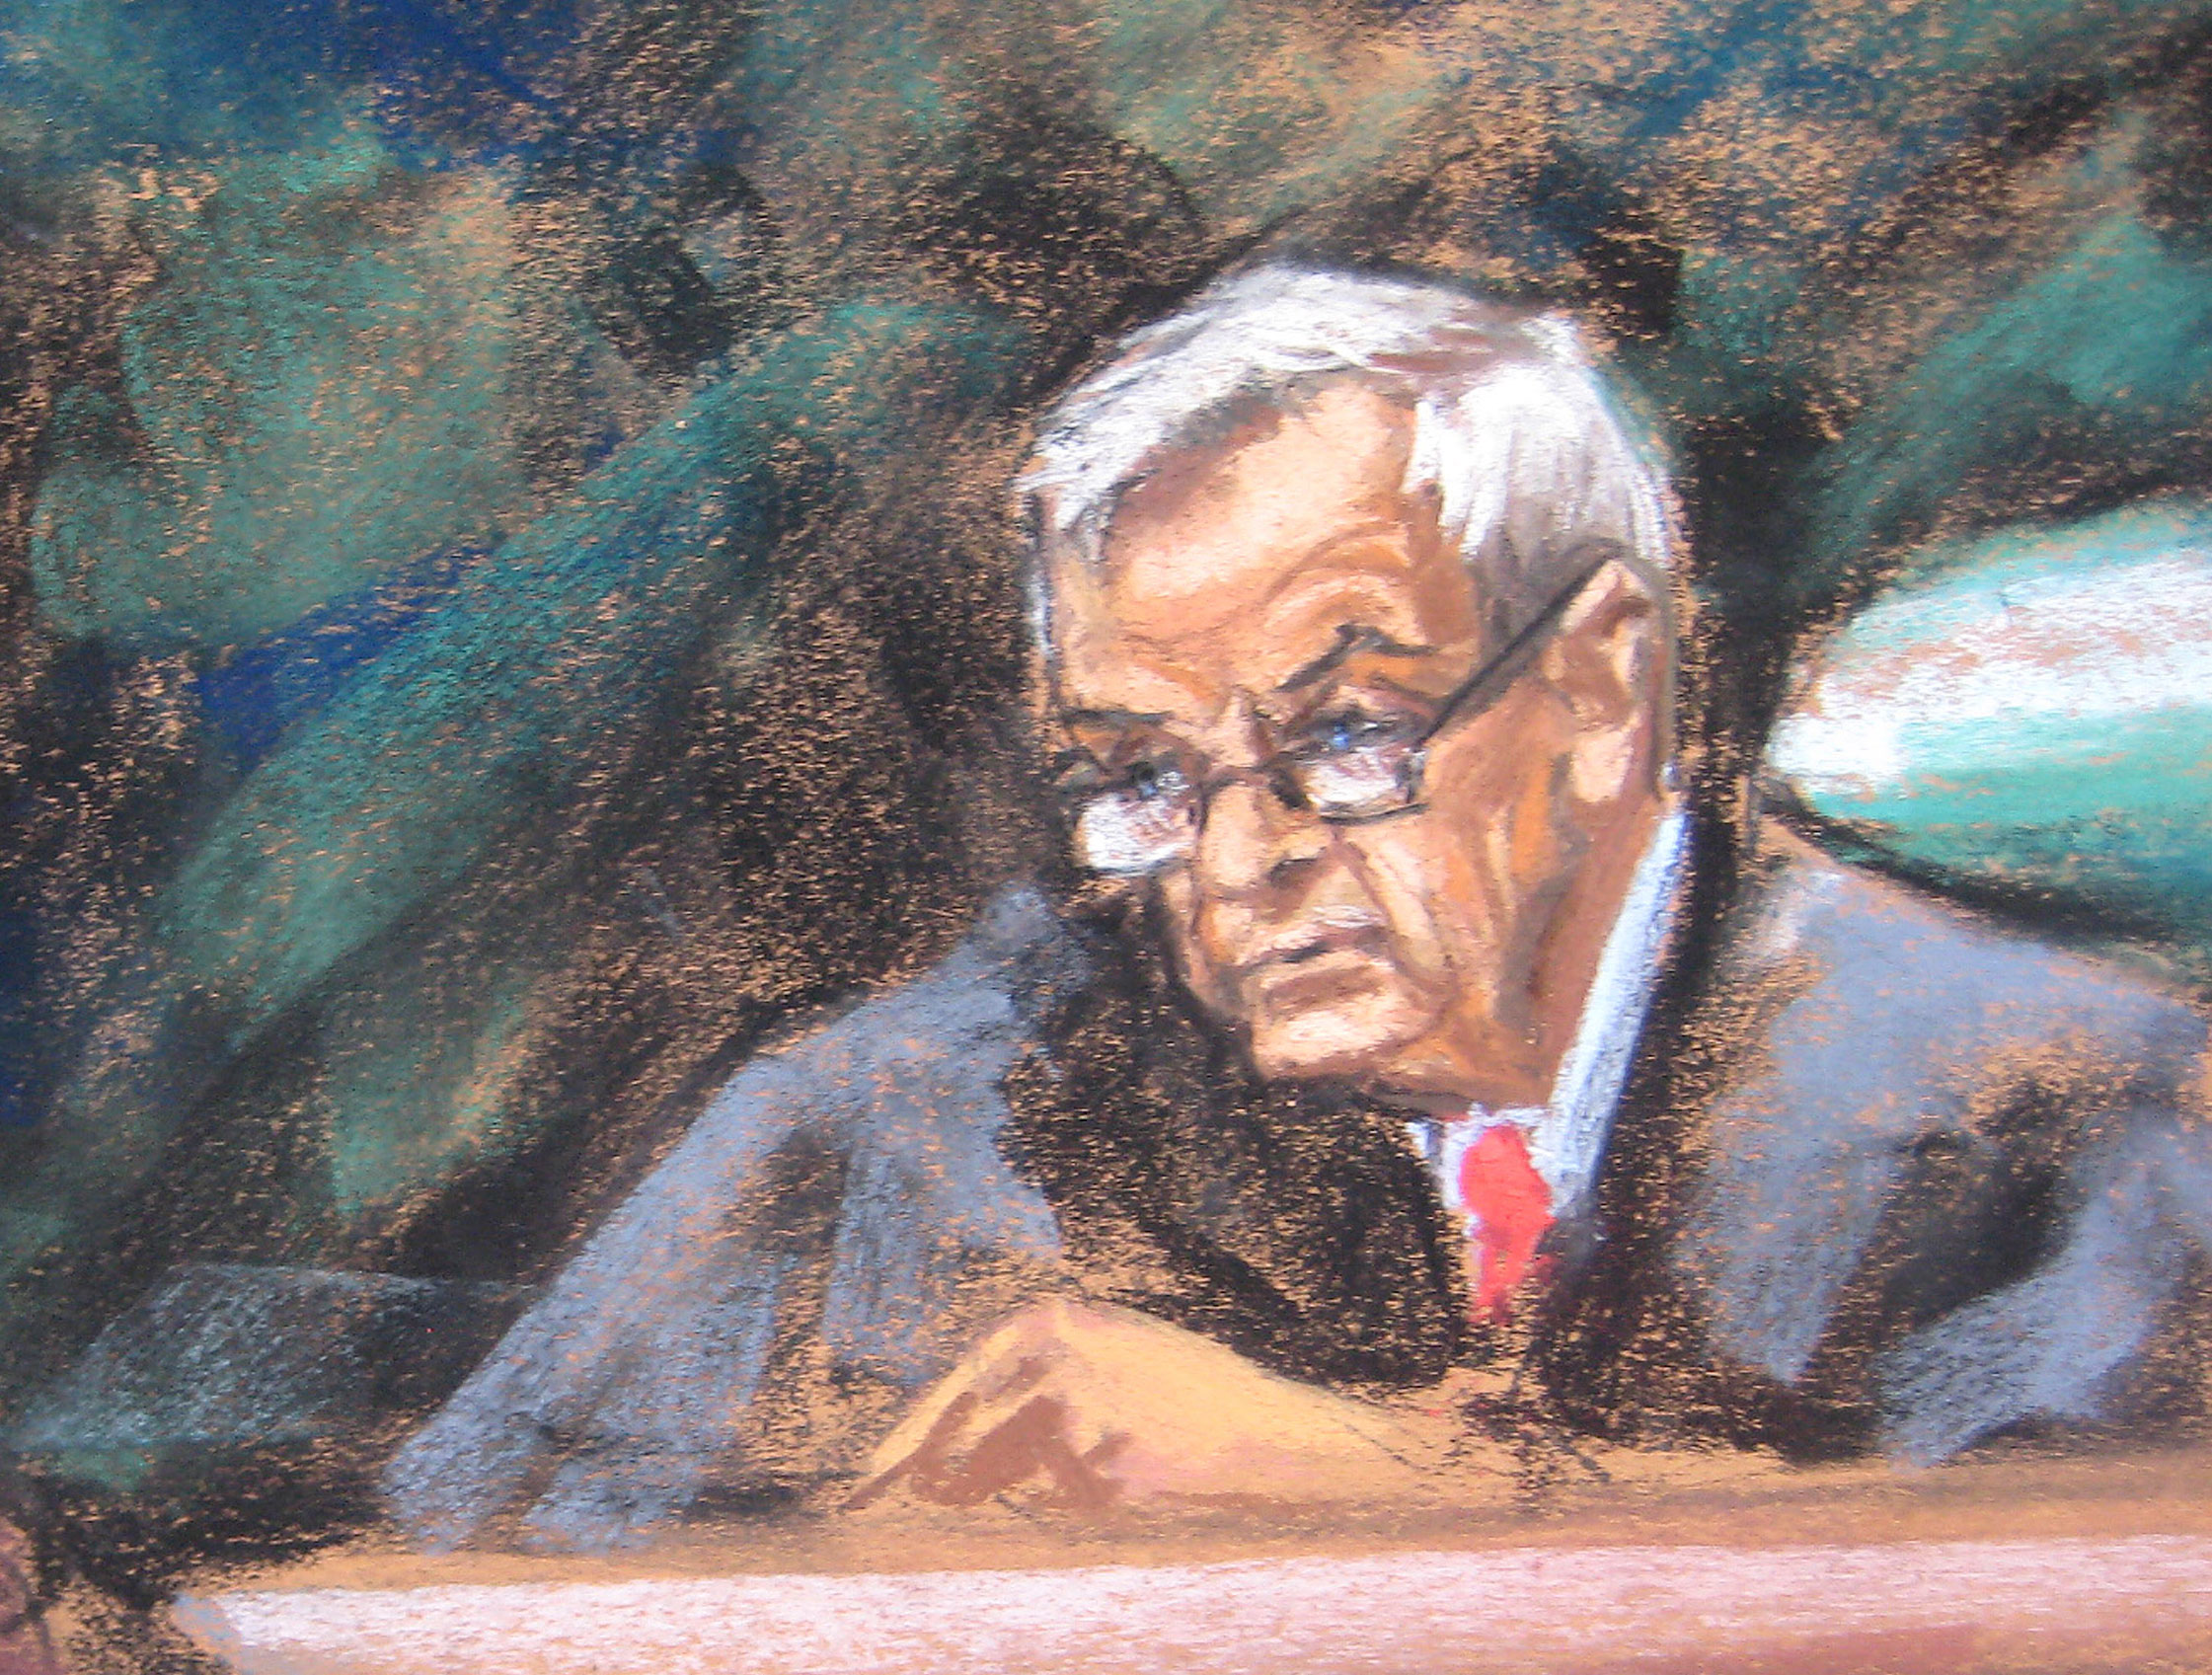 US District Judge Raymond Dearie in a courtroom sketch from 2013. (Jane Rosenberg—Reuters)